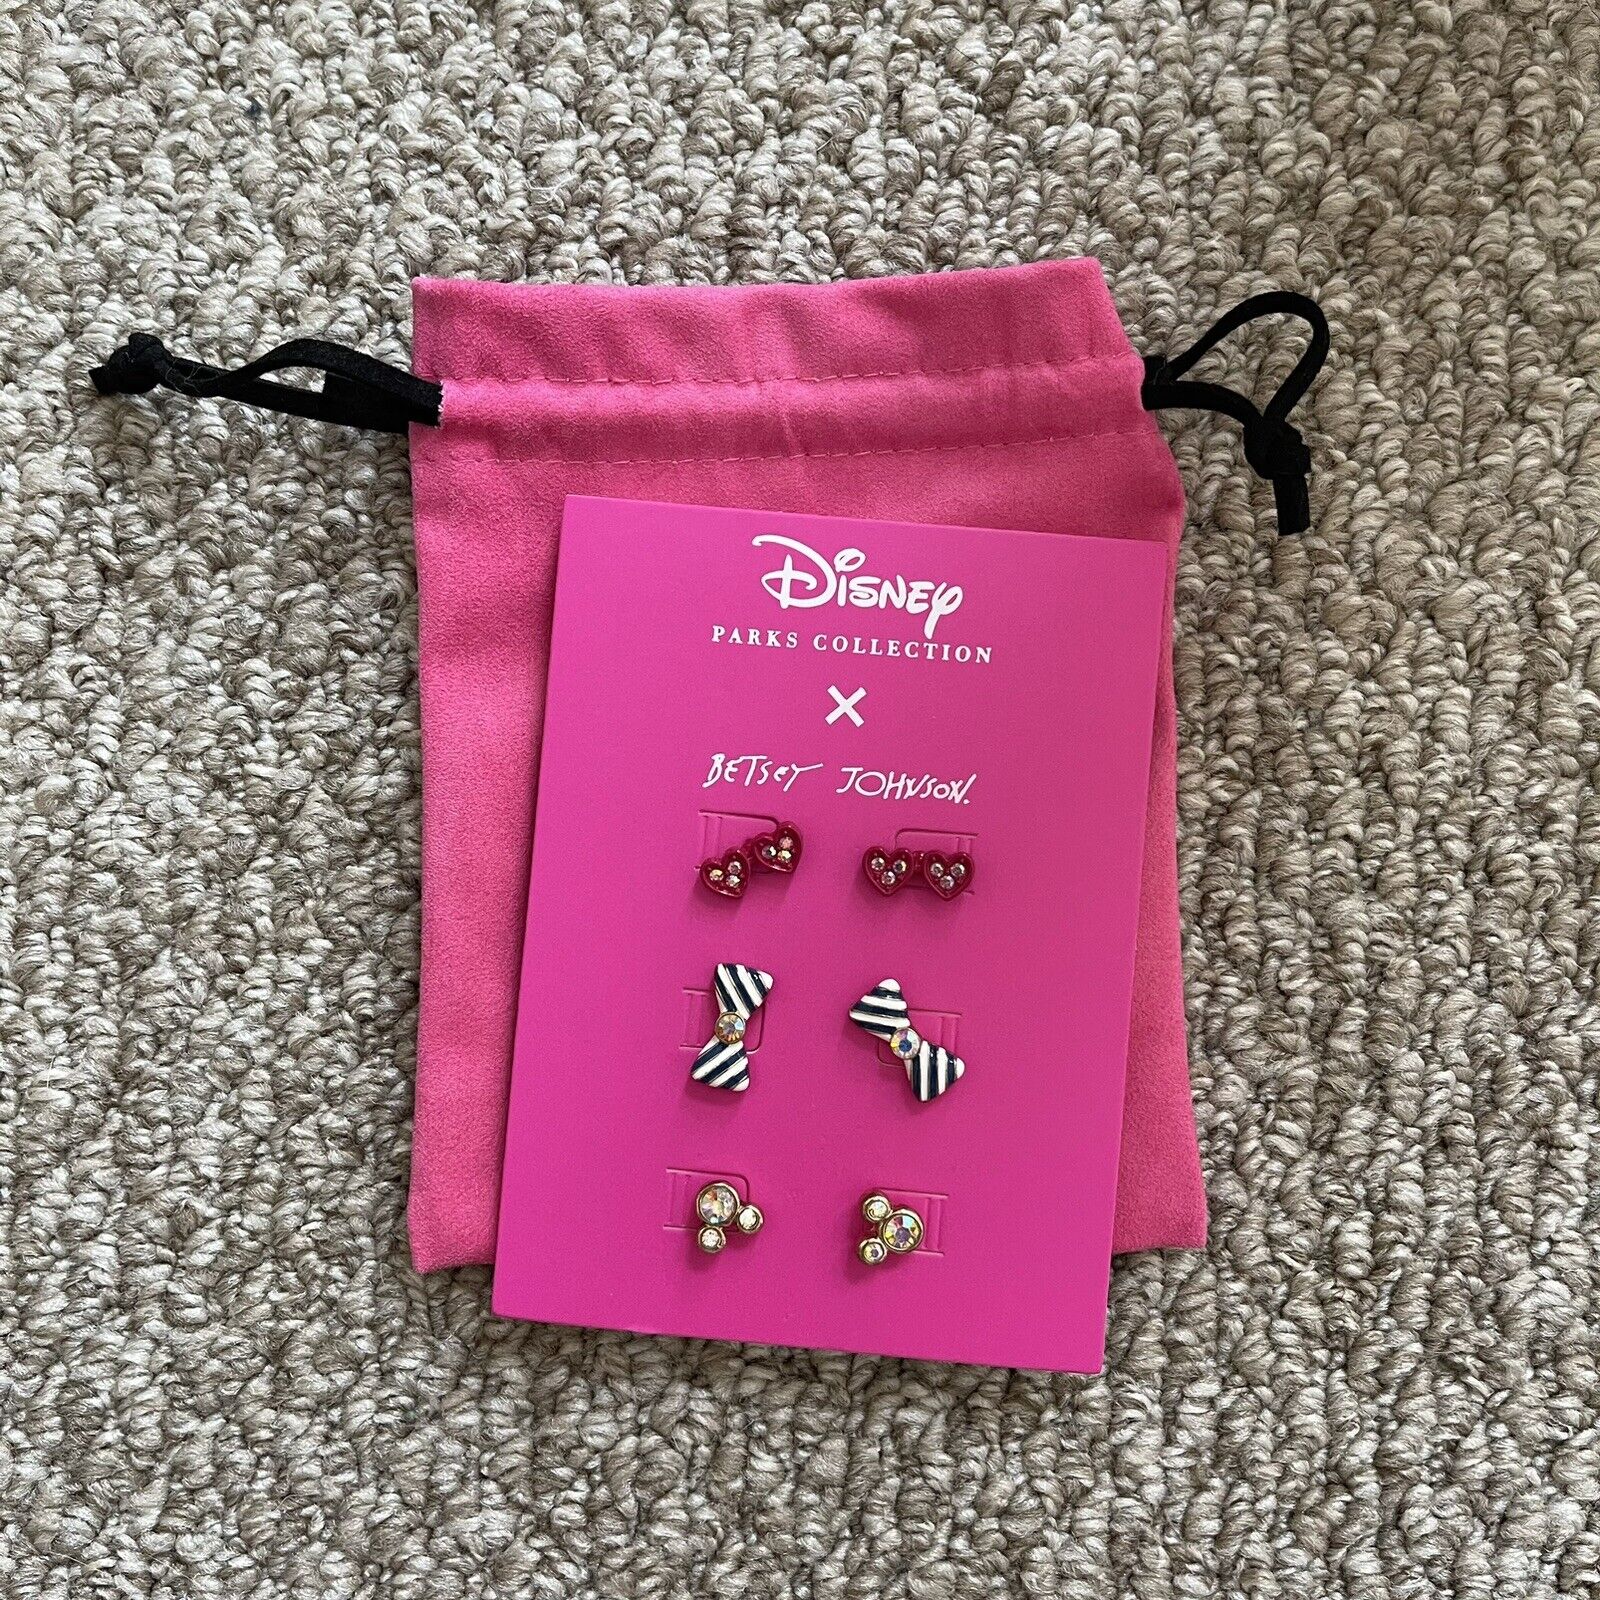 NEW Disney Parks Betsy Johnson Minnie Mouse Bow Earrings 3 Pack